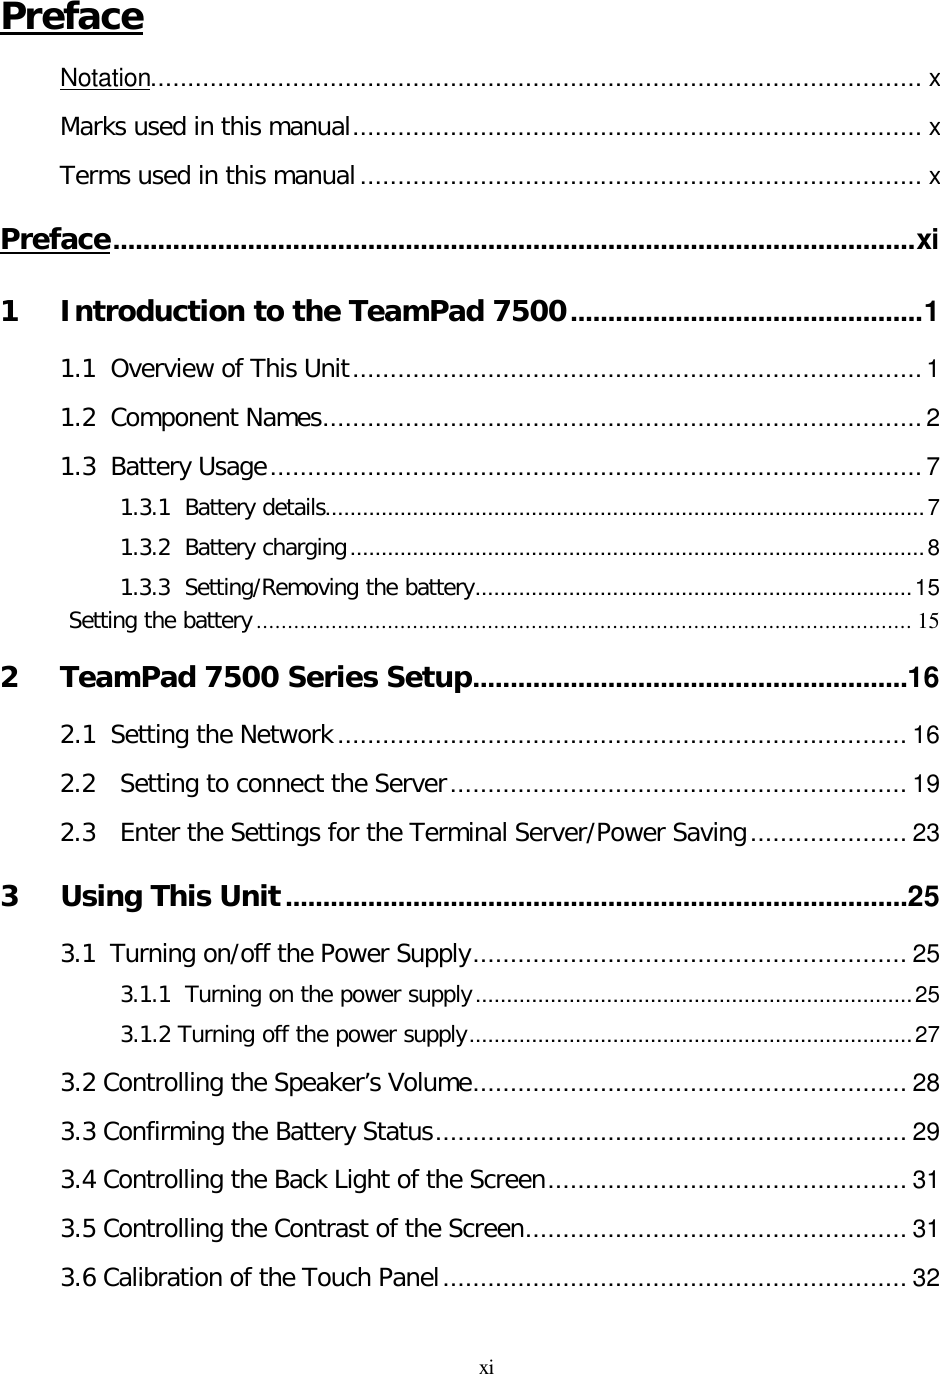 xi Preface Notation....................................................................................................... x Marks used in this manual............................................................................ x Terms used in this manual ........................................................................... x Preface...........................................................................................................xi 1 Introduction to the TeamPad 7500...............................................1 1.1  Overview of This Unit............................................................................1 1.2  Component Names................................................................................2 1.3  Battery Usage.......................................................................................7 1.3.1  Battery details................................................................................................7 1.3.2  Battery charging............................................................................................8 1.3.3  Setting/Removing the battery......................................................................15 Setting the battery ......................................................................................................... 15 2 TeamPad 7500 Series Setup..........................................................16 2.1  Setting the Network ............................................................................ 16 2.2 Setting to connect the Server............................................................. 19 2.3 Enter the Settings for the Terminal Server/Power Saving..................... 23 3 Using This Unit...................................................................................25 3.1  Turning on/off the Power Supply.......................................................... 25 3.1.1  Turning on the power supply......................................................................25 3.1.2 Turning off the power supply.......................................................................27 3.2 Controlling the Speaker’s Volume.......................................................... 28 3.3 Confirming the Battery Status............................................................... 29 3.4 Controlling the Back Light of the Screen................................................ 31 3.5 Controlling the Contrast of the Screen................................................... 31 3.6 Calibration of the Touch Panel.............................................................. 32 